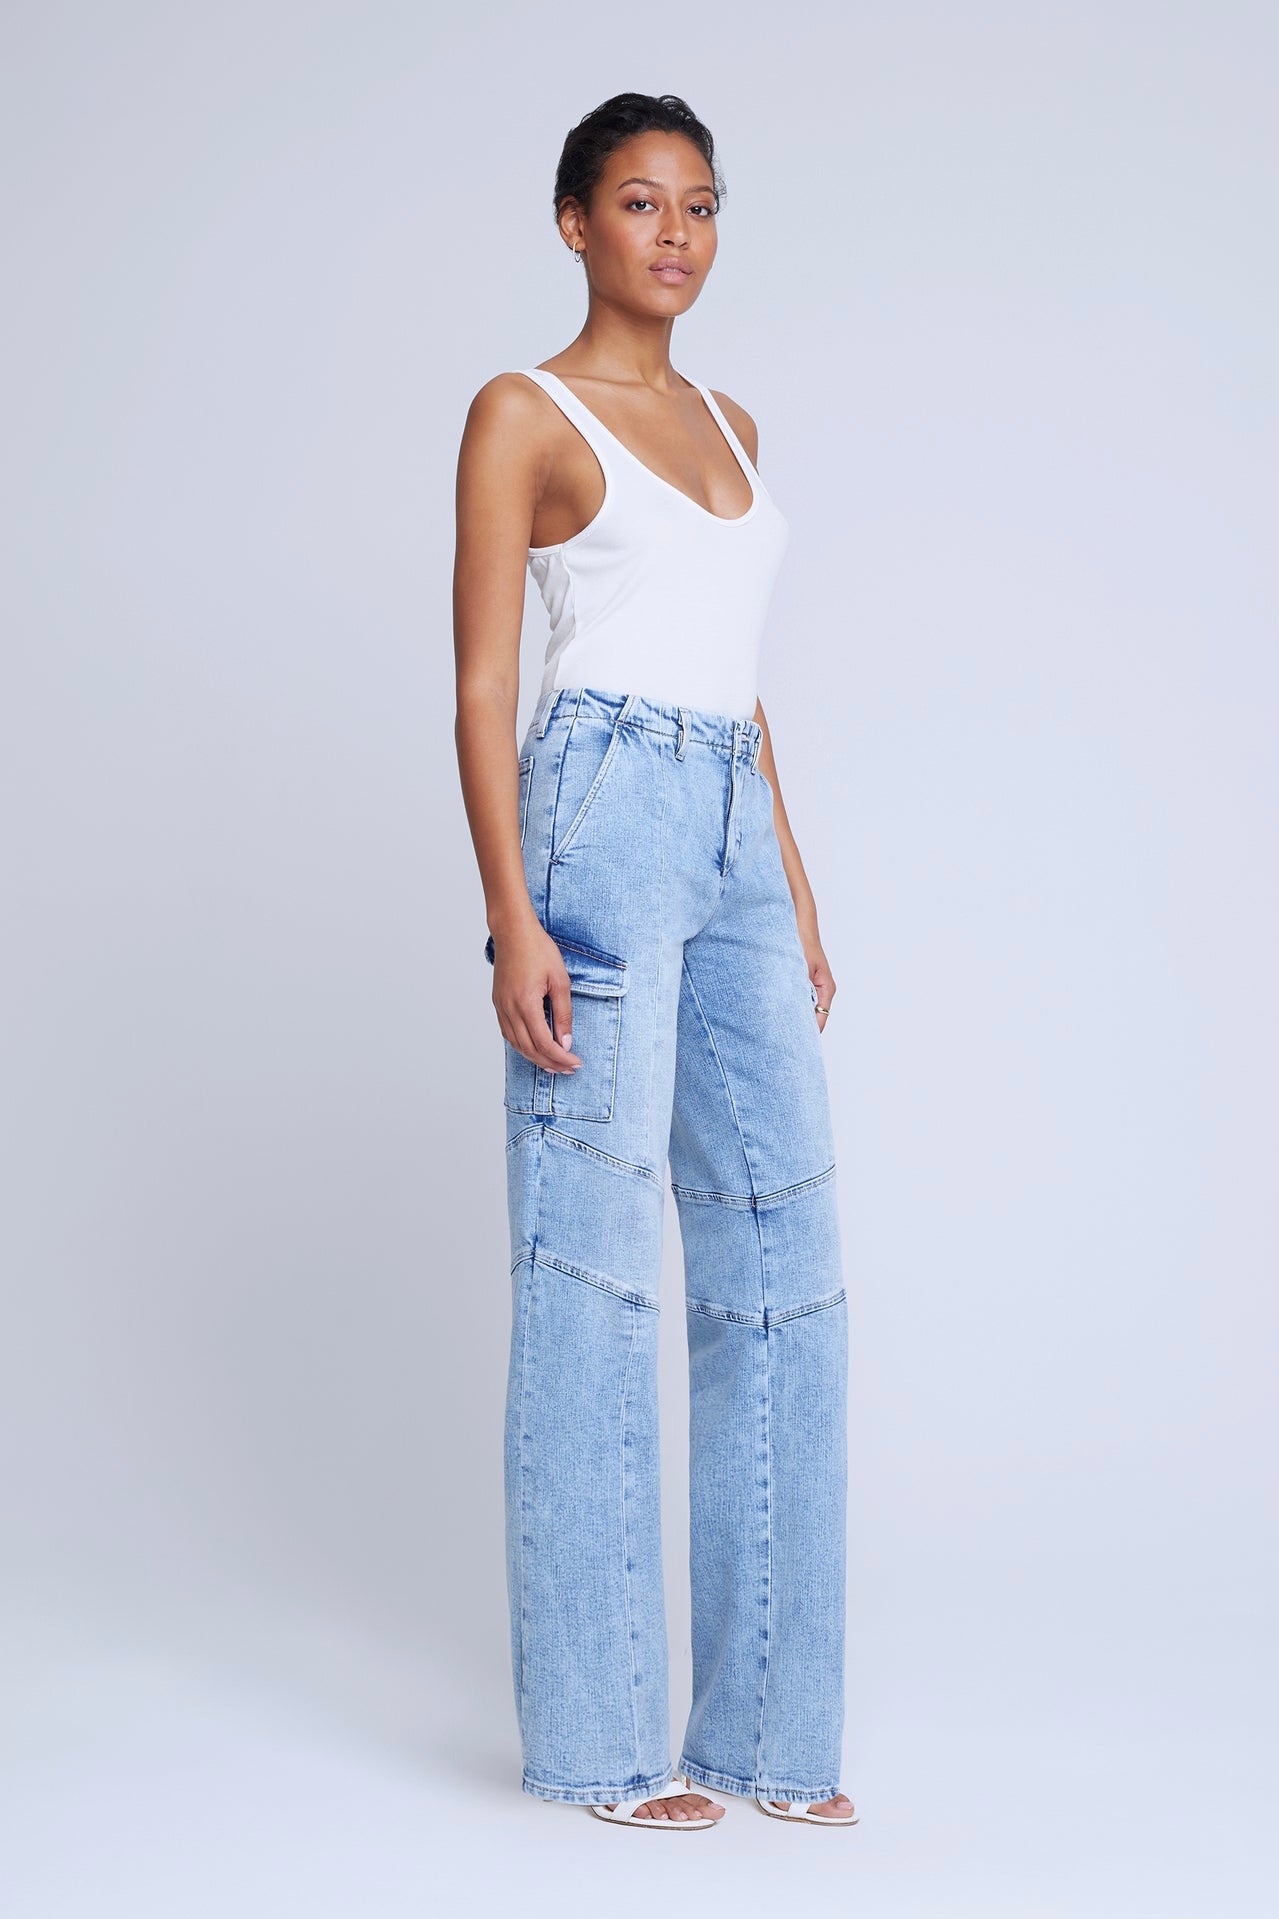 Wide leg jeans for short people – Bay Area Fashionista